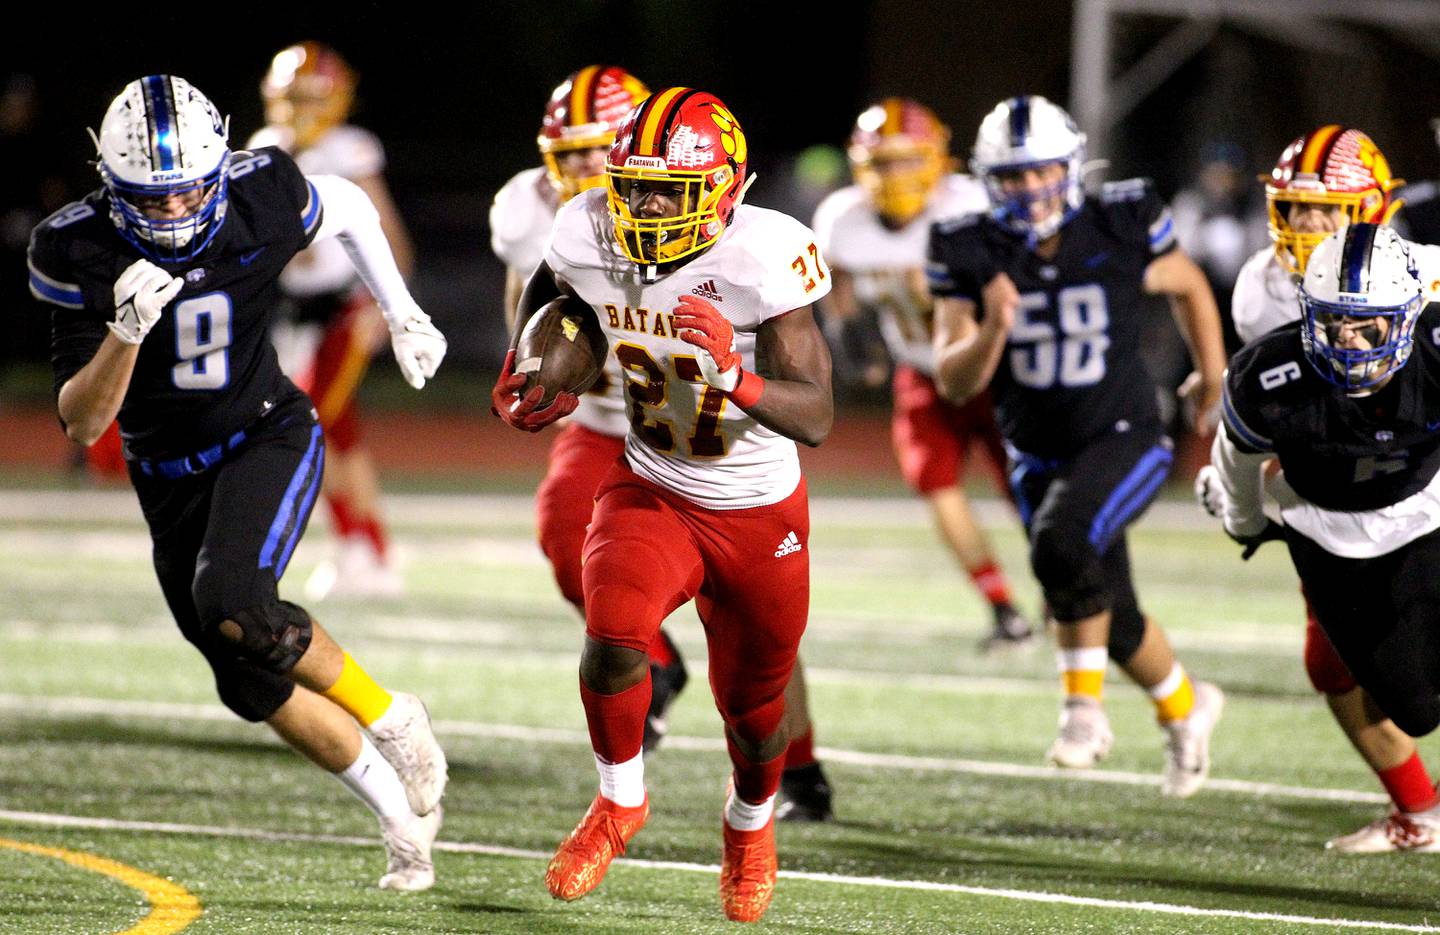 Batavia's Jalen Buckley runs the ball for a touchdown during a game at St. Charles North on Friday, Oct. 22, 2021.